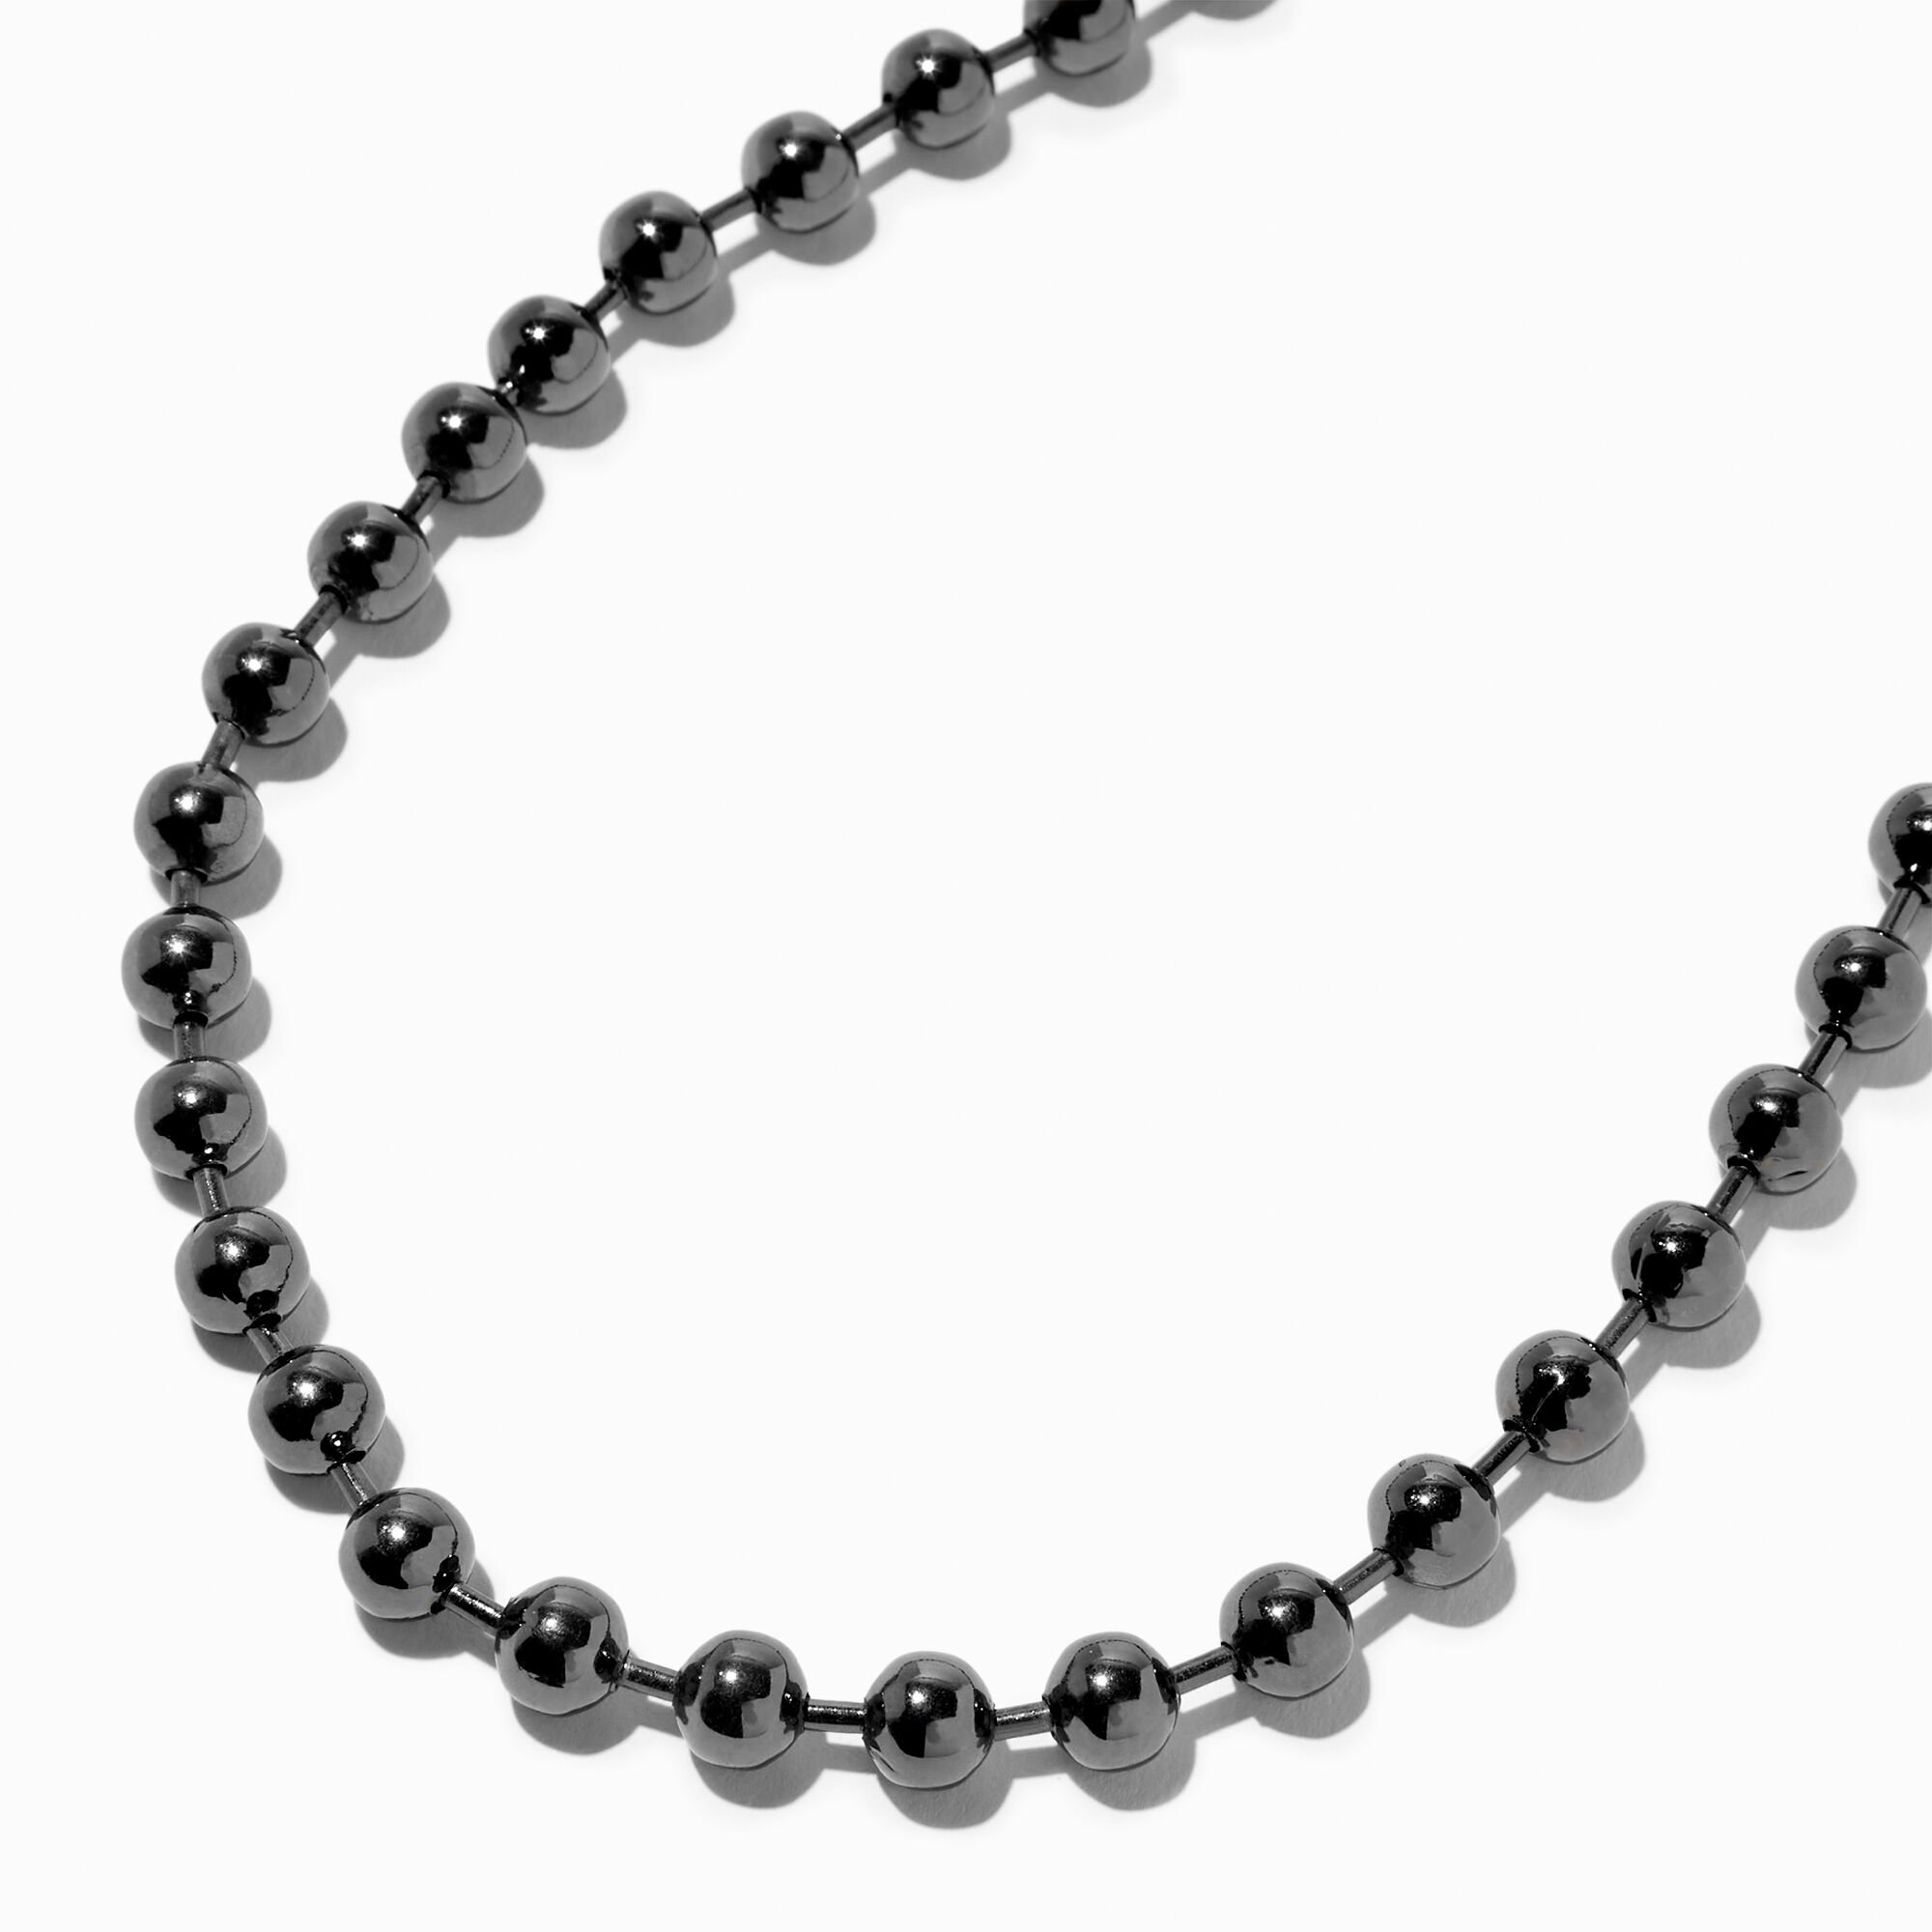 View Claires Hematite Ball Chain Necklace information